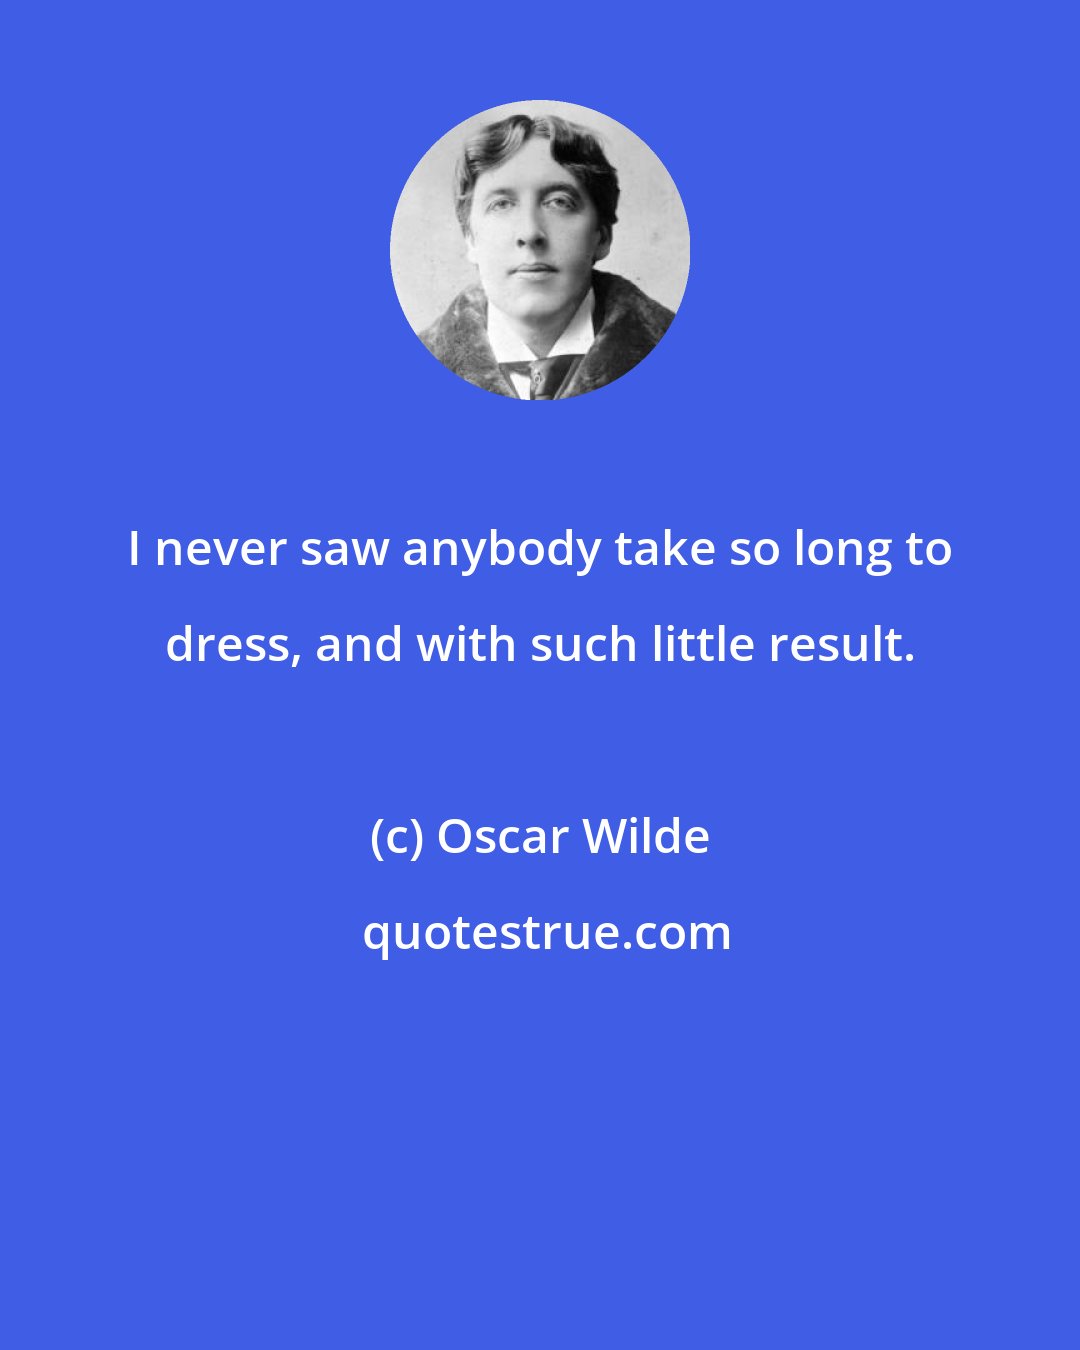 Oscar Wilde: I never saw anybody take so long to dress, and with such little result.